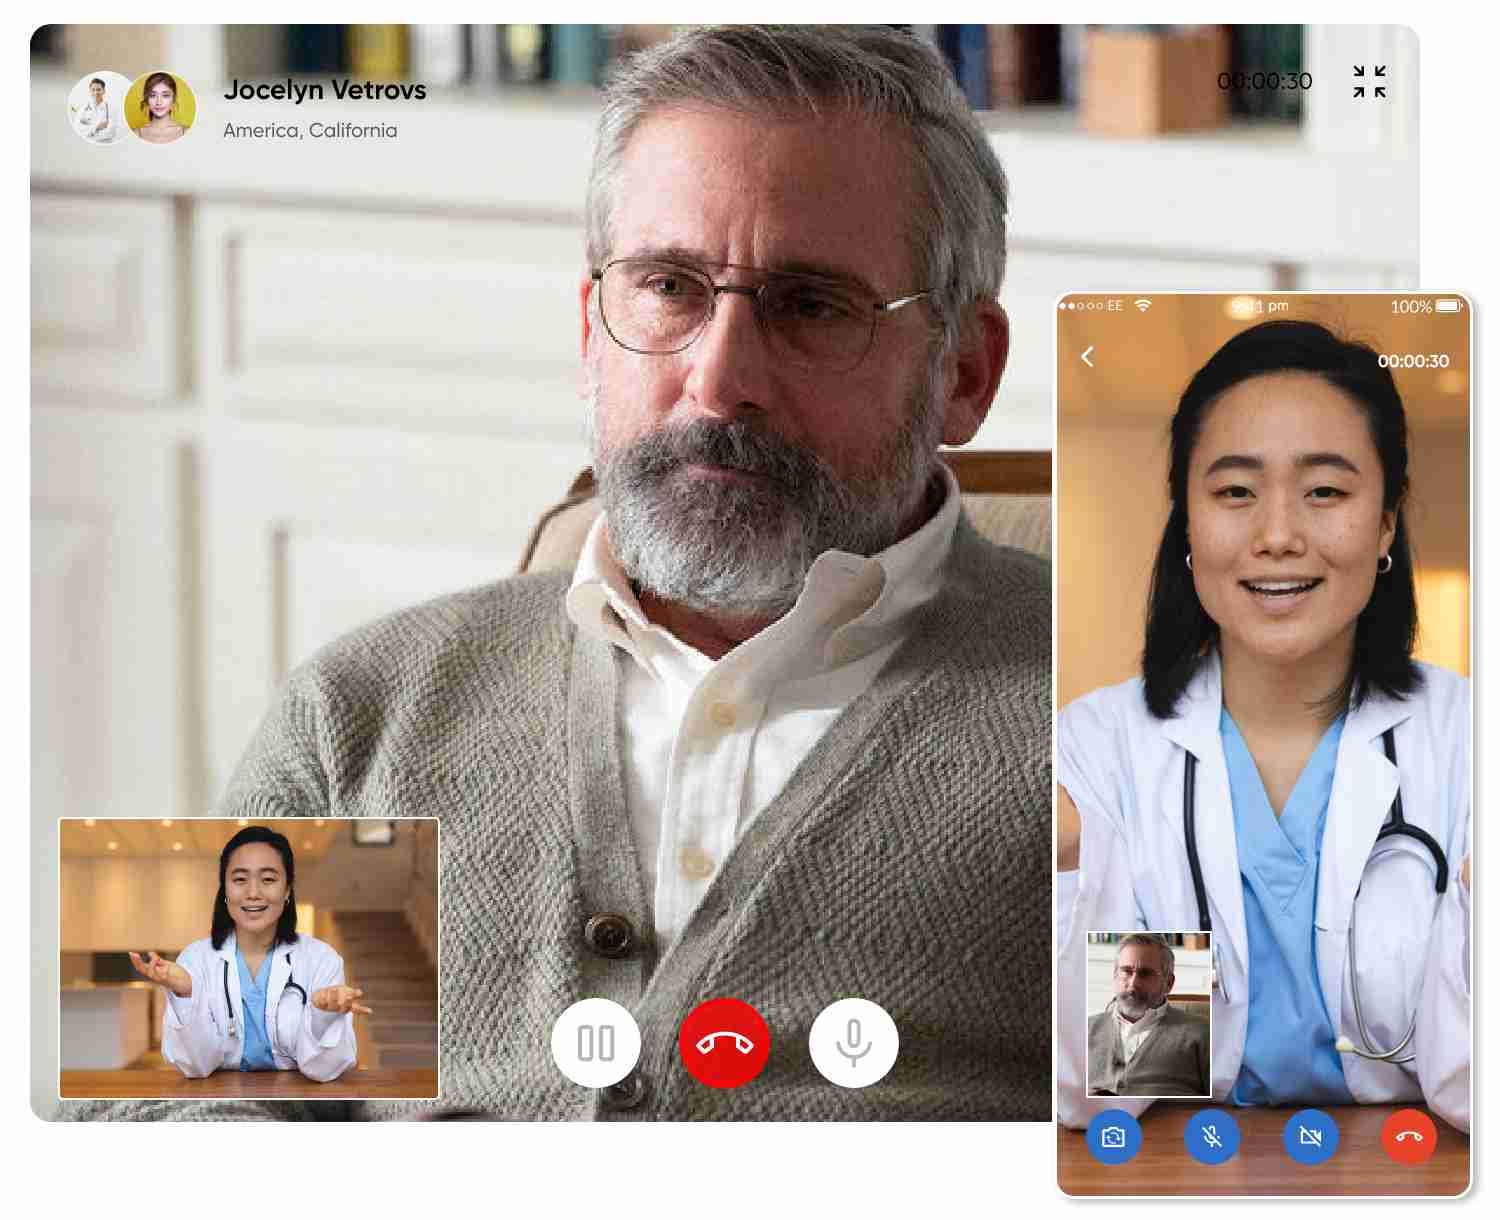 Tablet and mobile view of patient virtually interacting with the provider